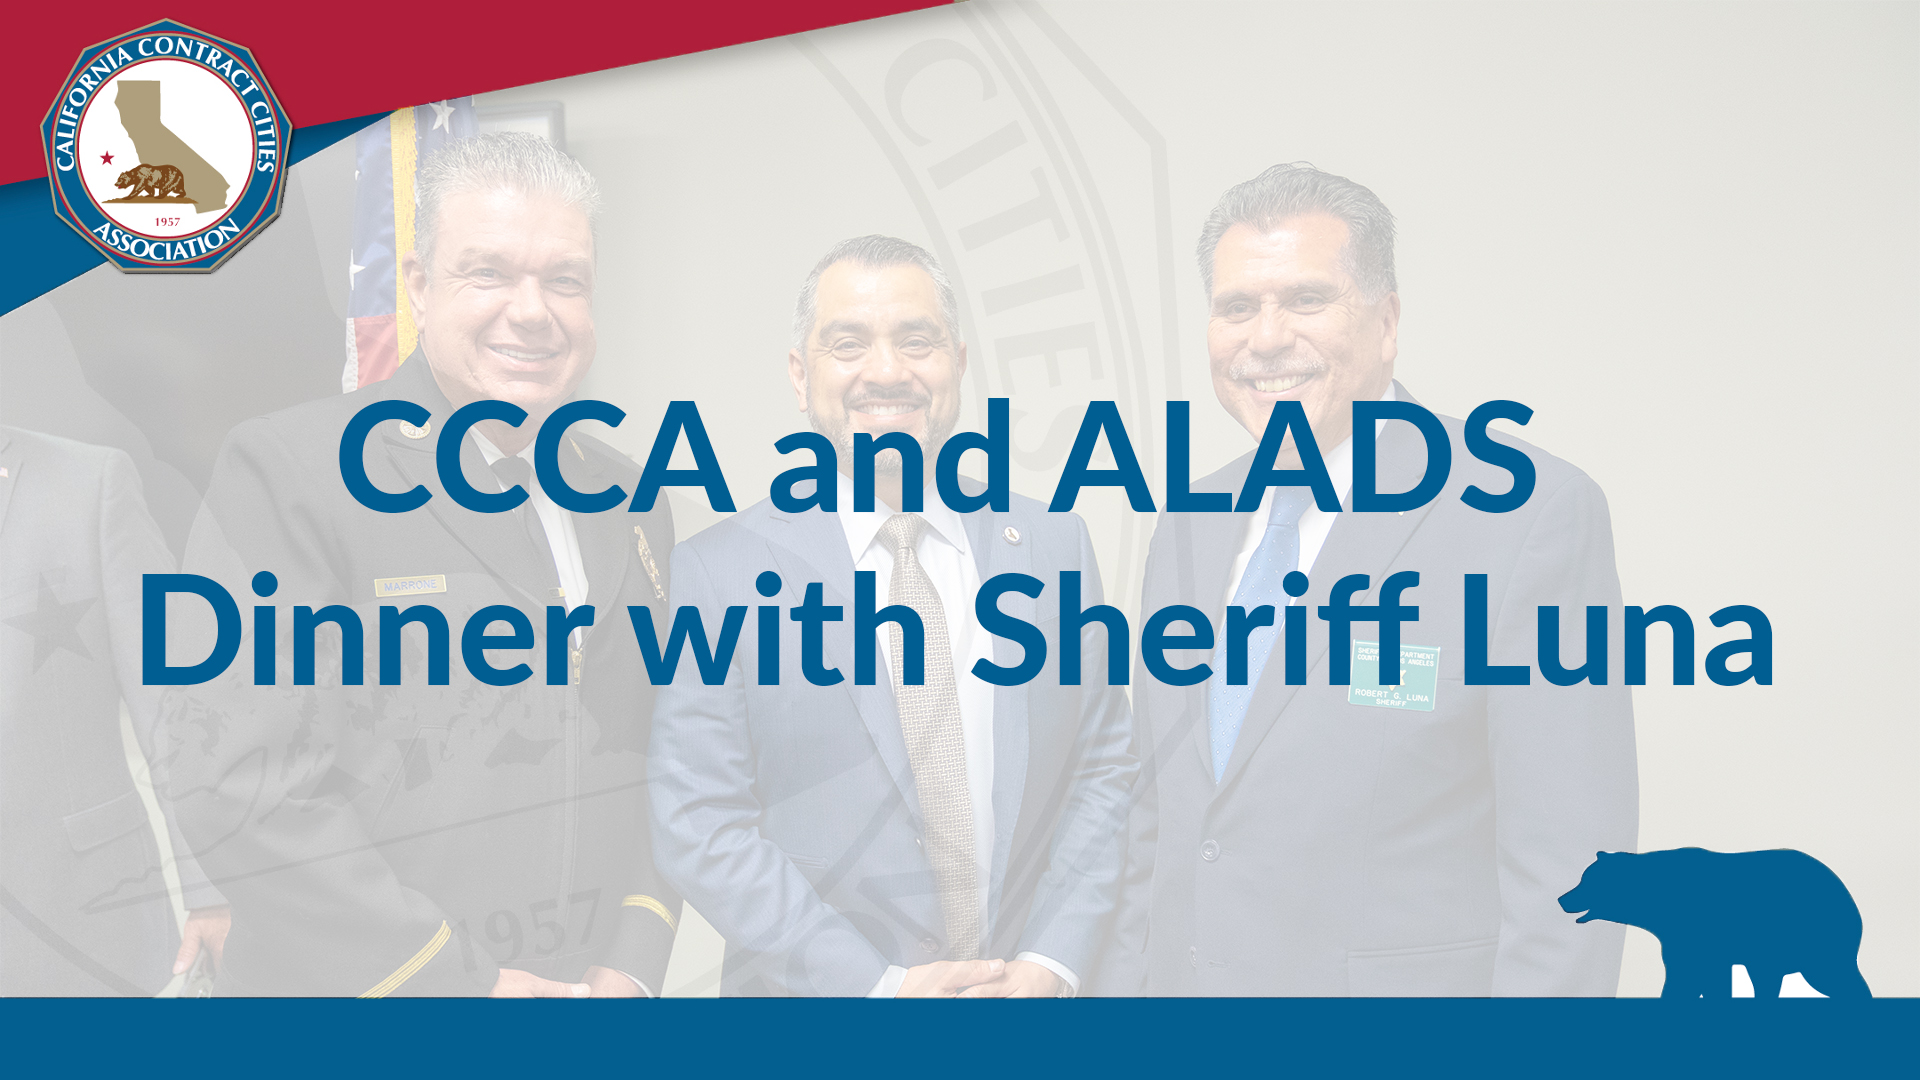 CCCA and ALADS Dinner with Sheriff Luna